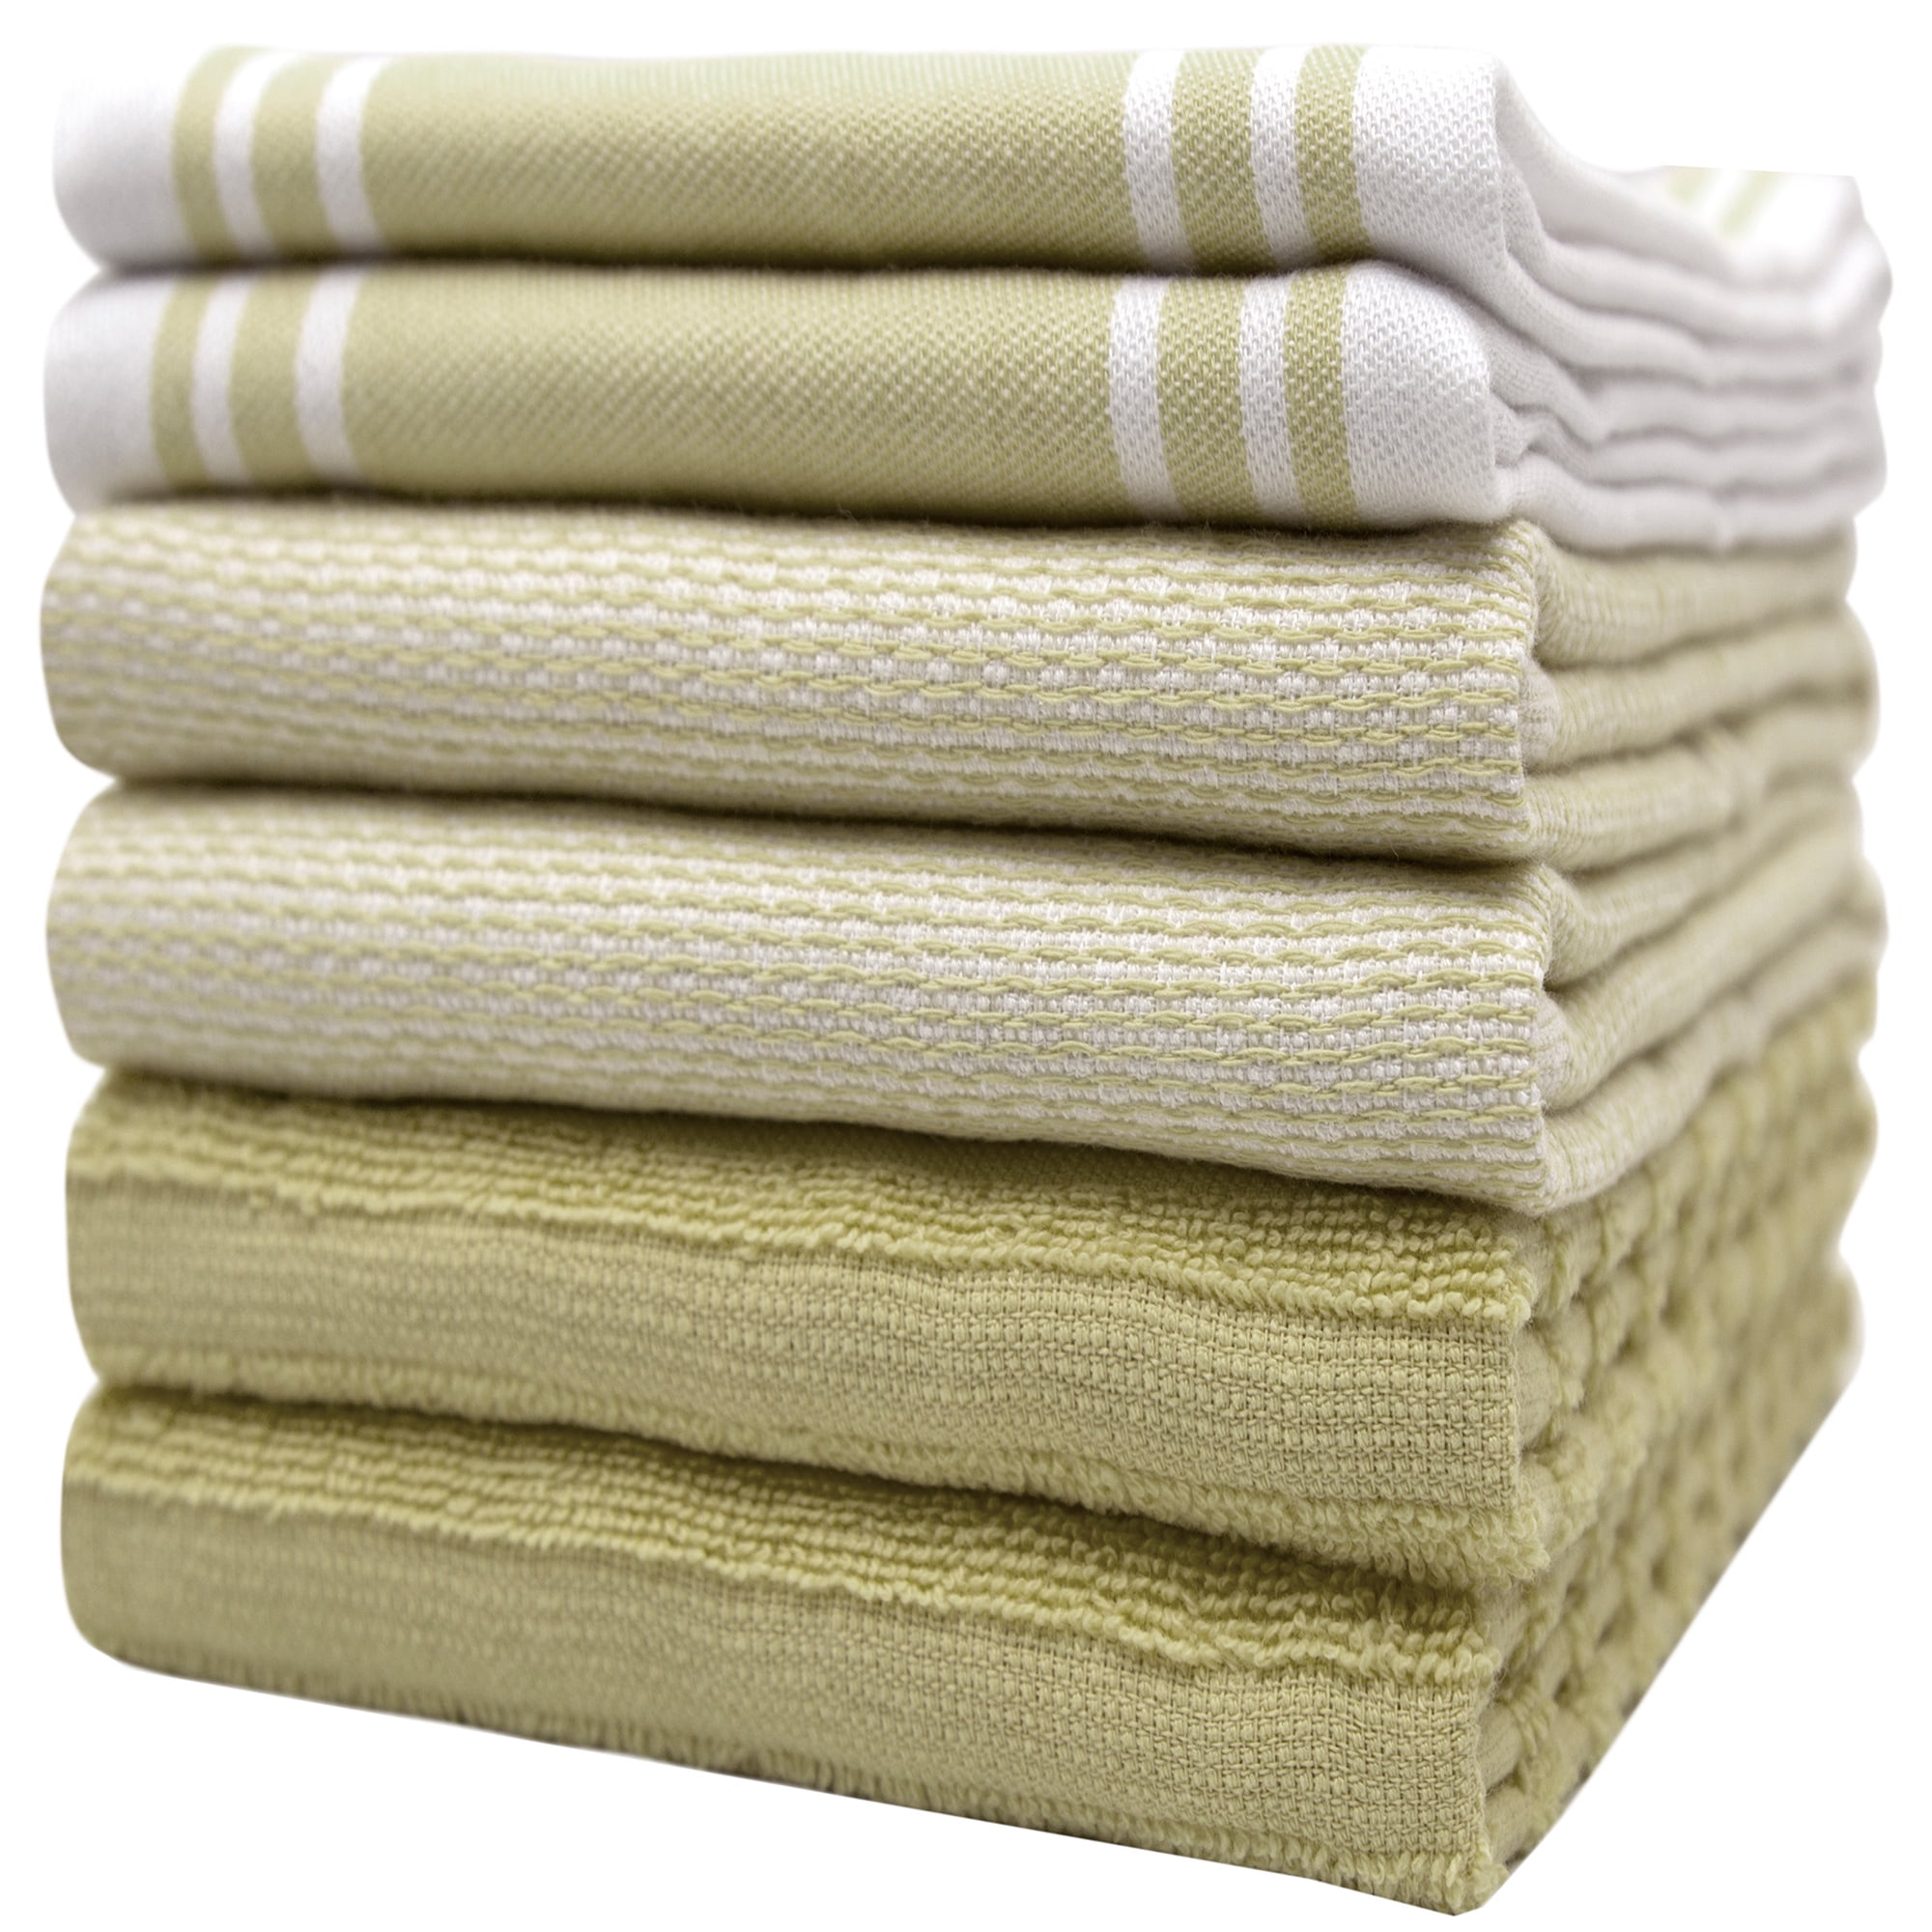  Williams-Sonoma Absorbent Kitchen Towels Multi-Pack